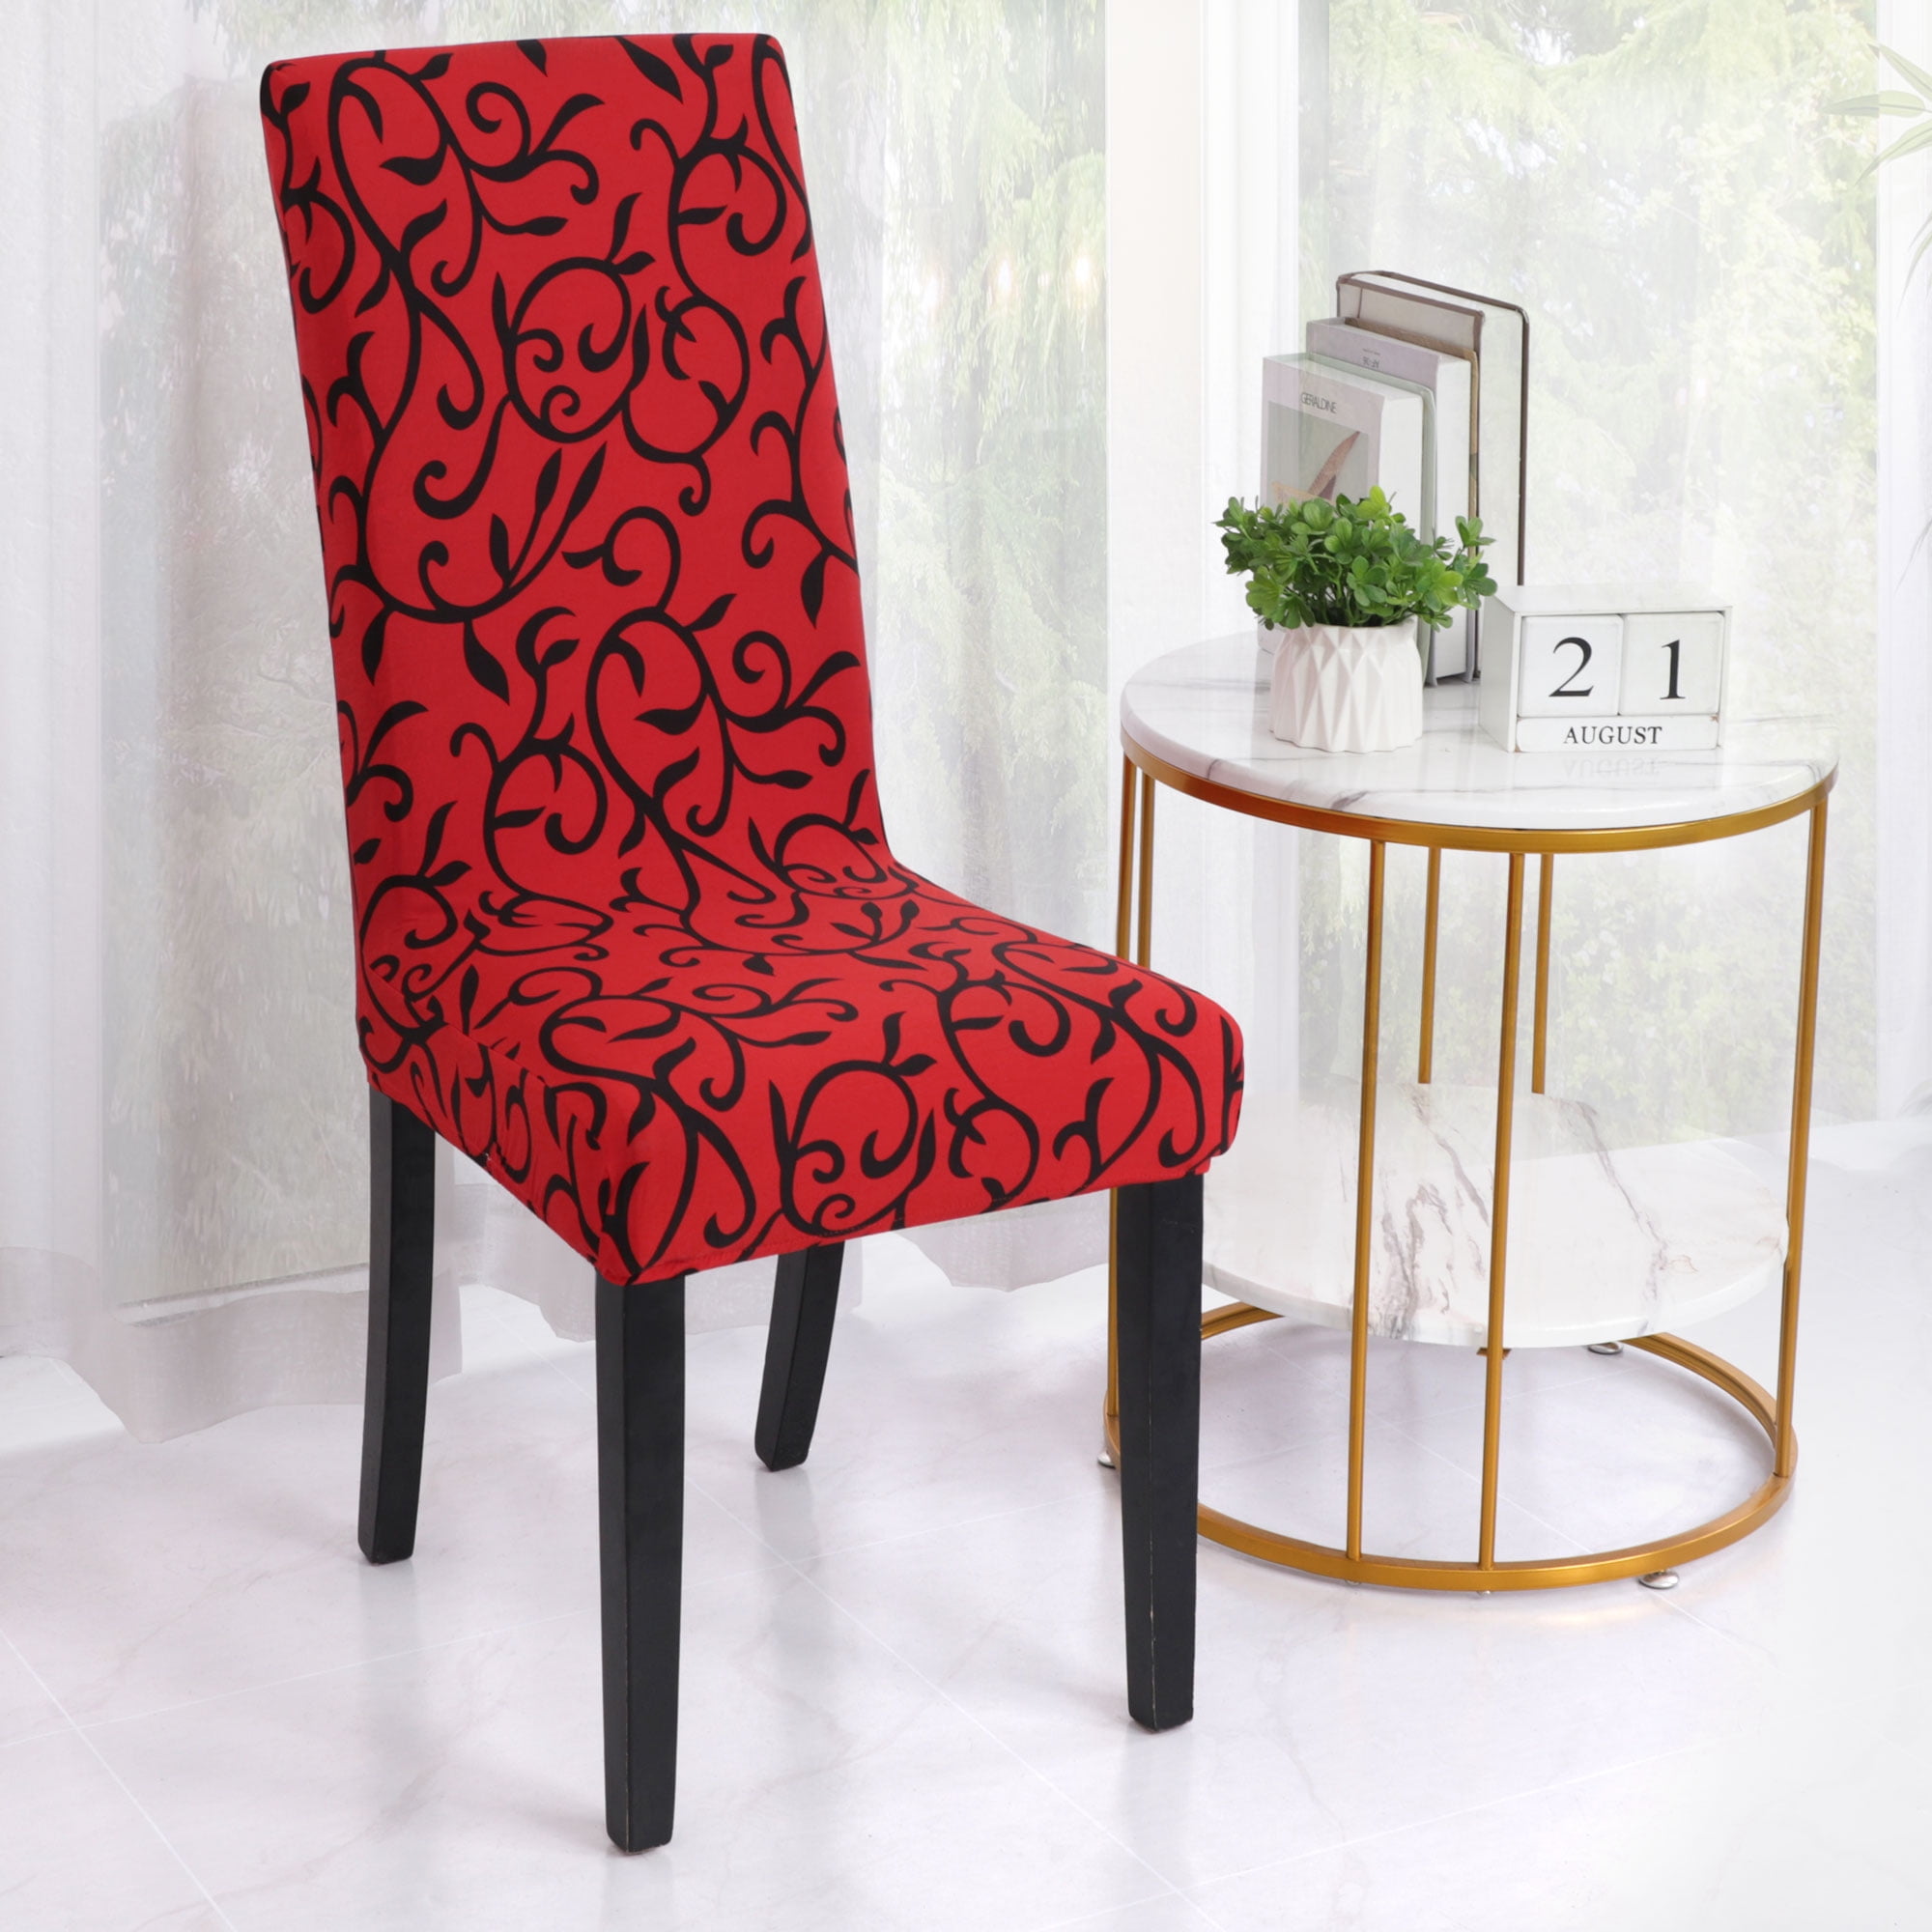 1PC Fashion Chair Slipcover Stretch Spandex Seat Cover Kitchen Removable Home 